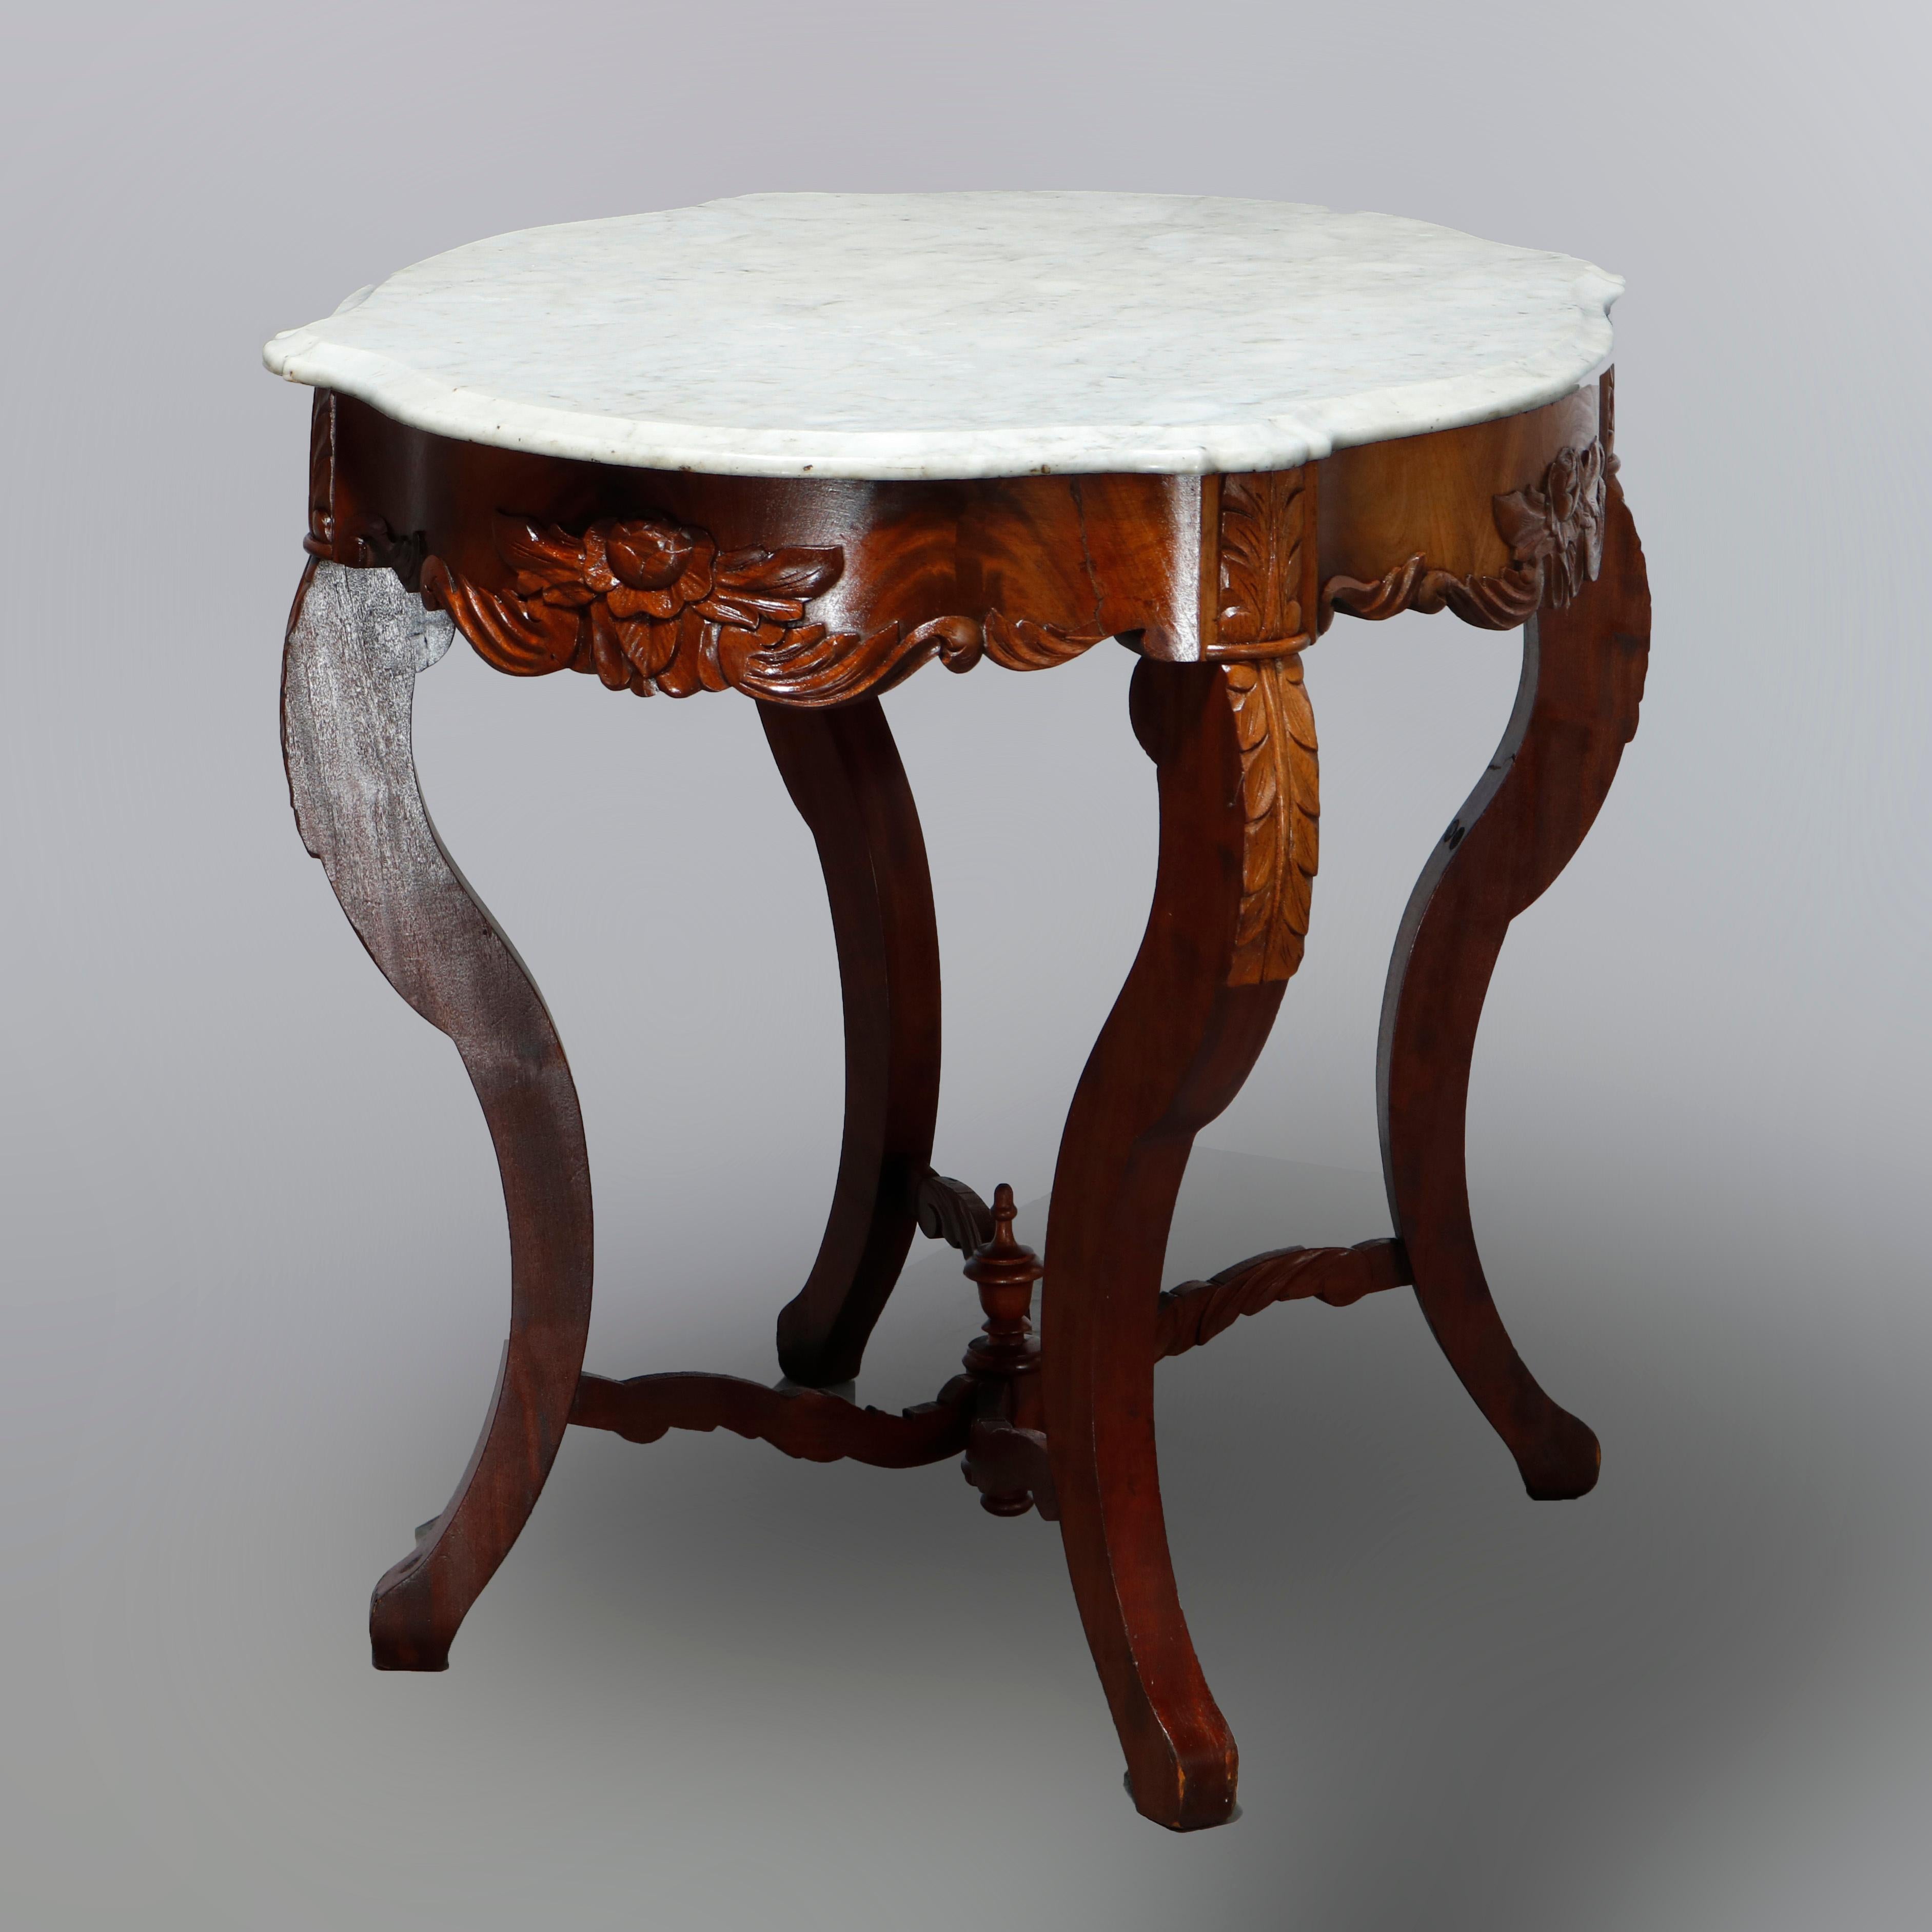 Antique Victorian Turtle Top Marble Top Mahogany & Walnut Lamp Table, Circa 1860 For Sale 7